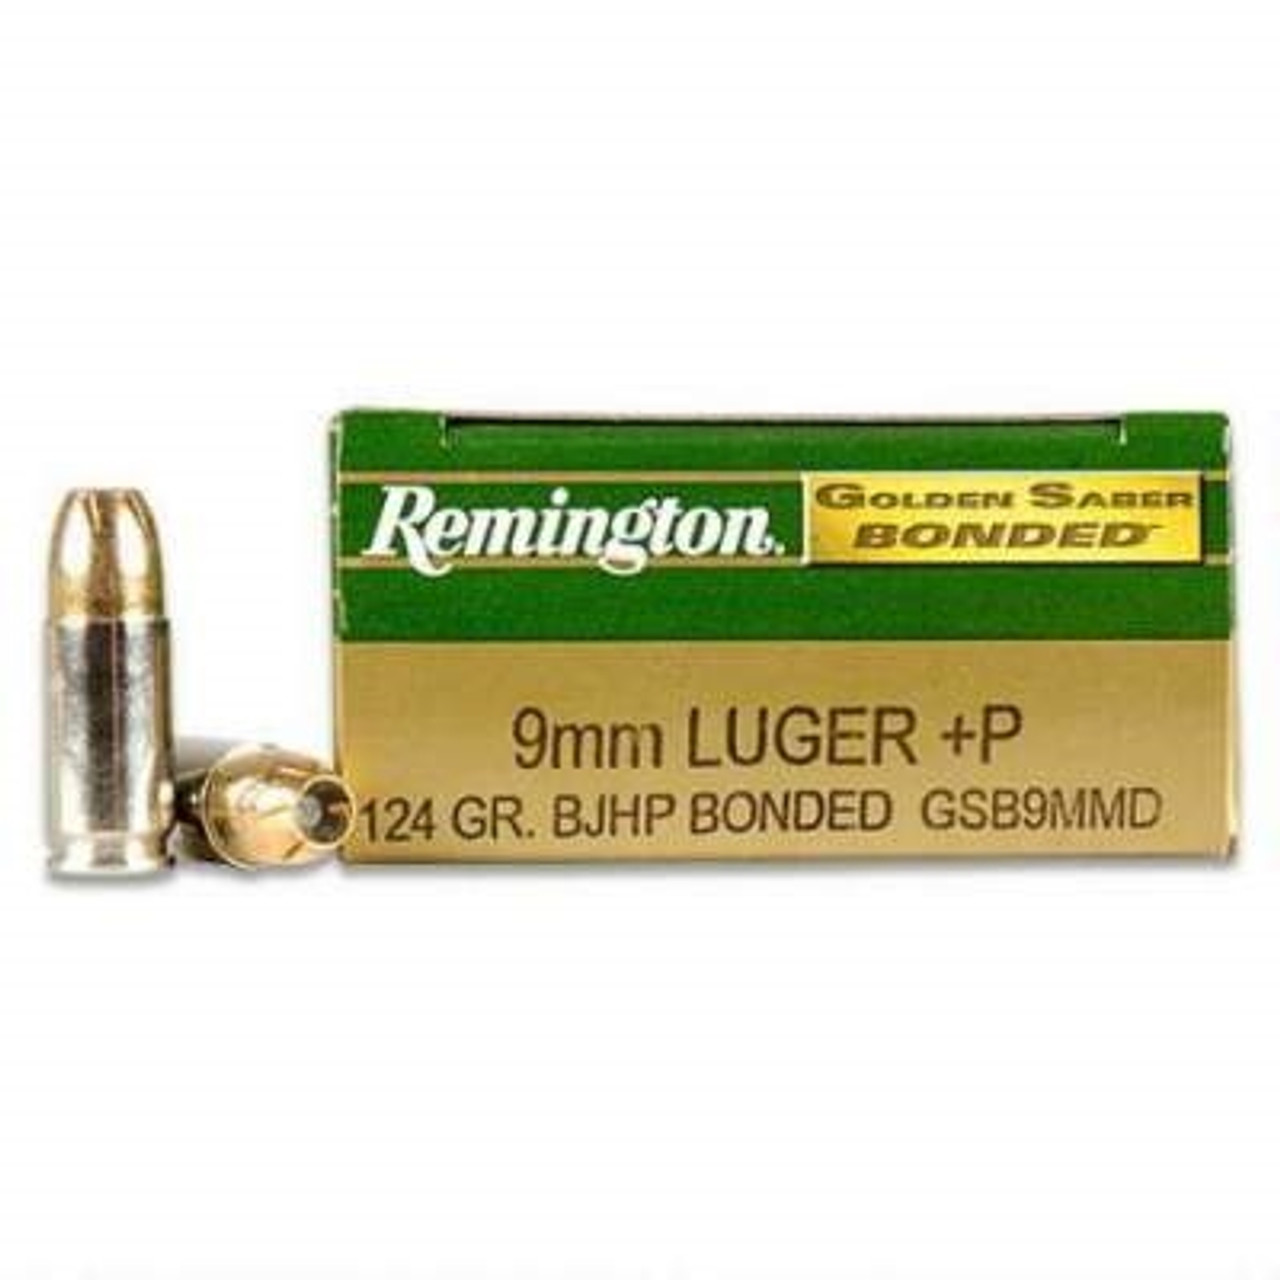 winchester 9mm ammo jacketed hollow point